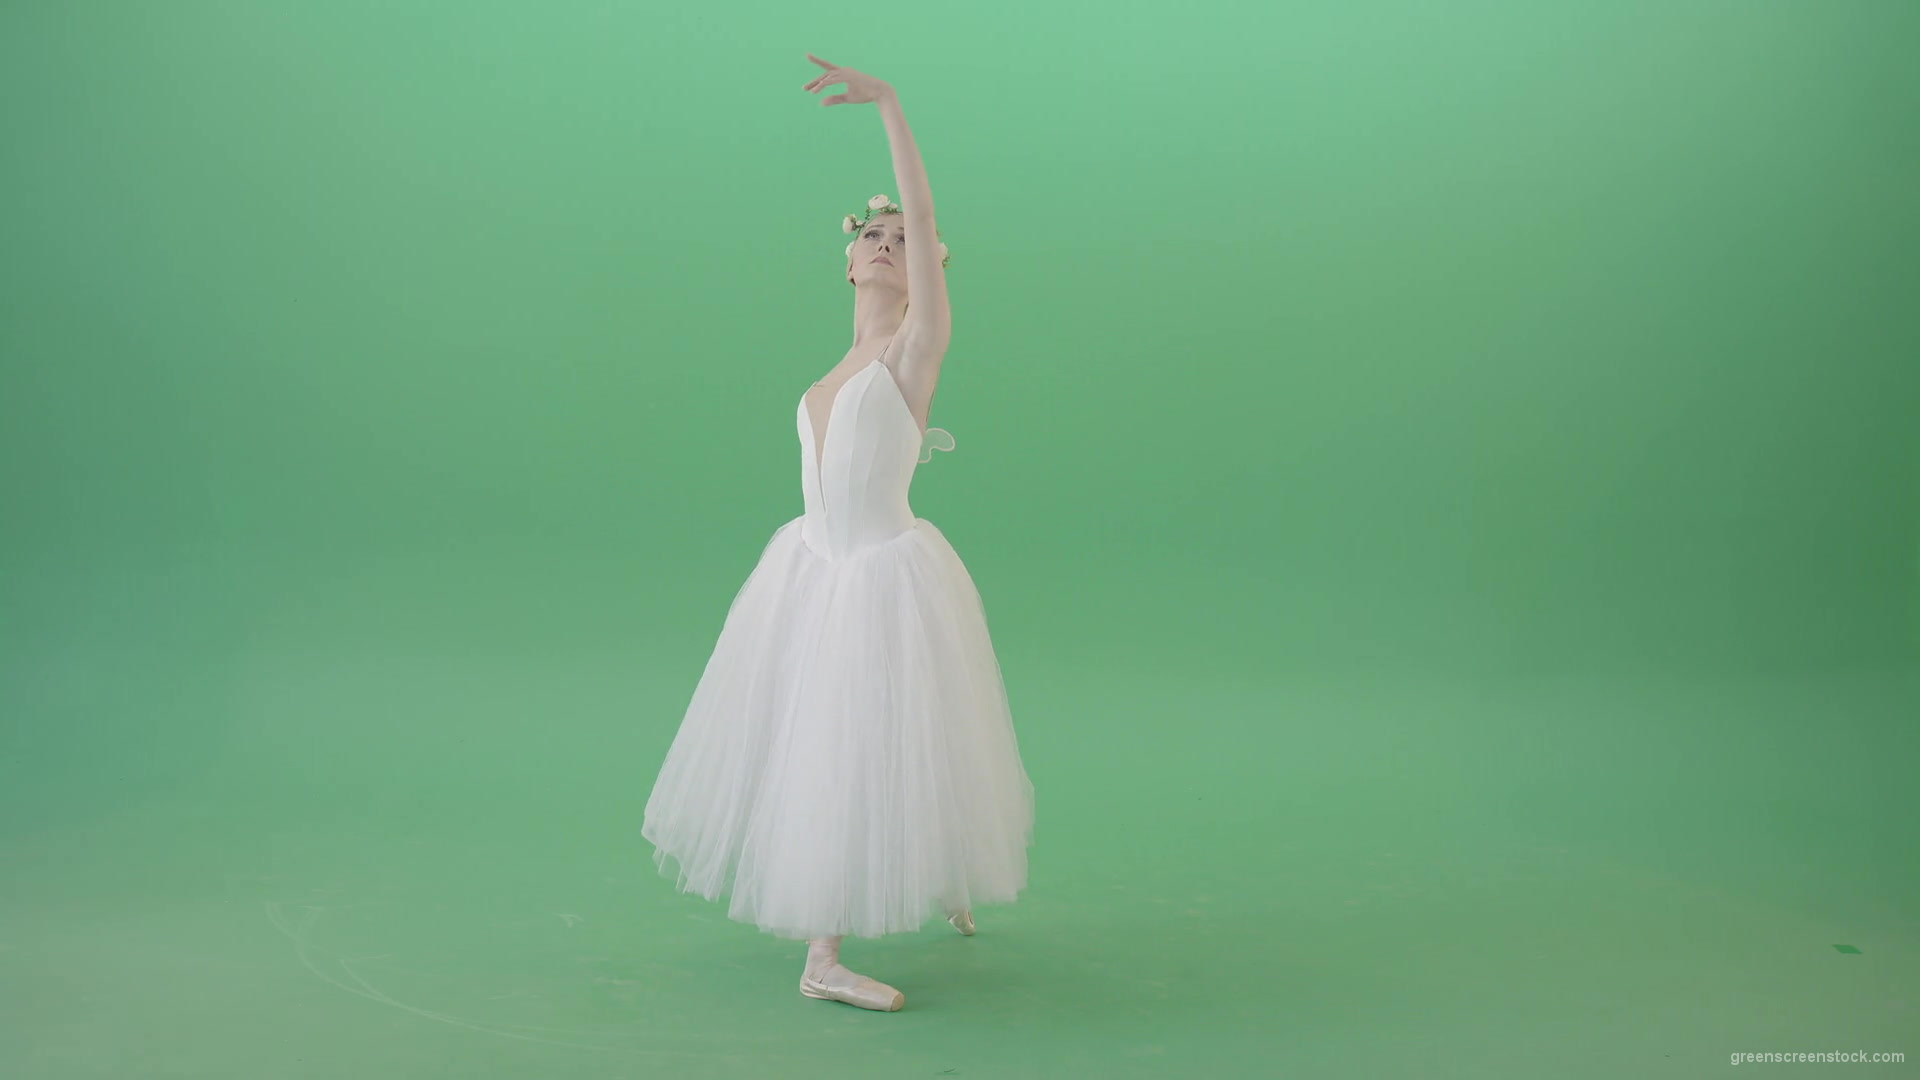 Ballet-Art-Princes-making-royal-regards-in-white-wedding-dress-isolated-on-green-screen-4K-Video-Footage-1920_007 Green Screen Stock